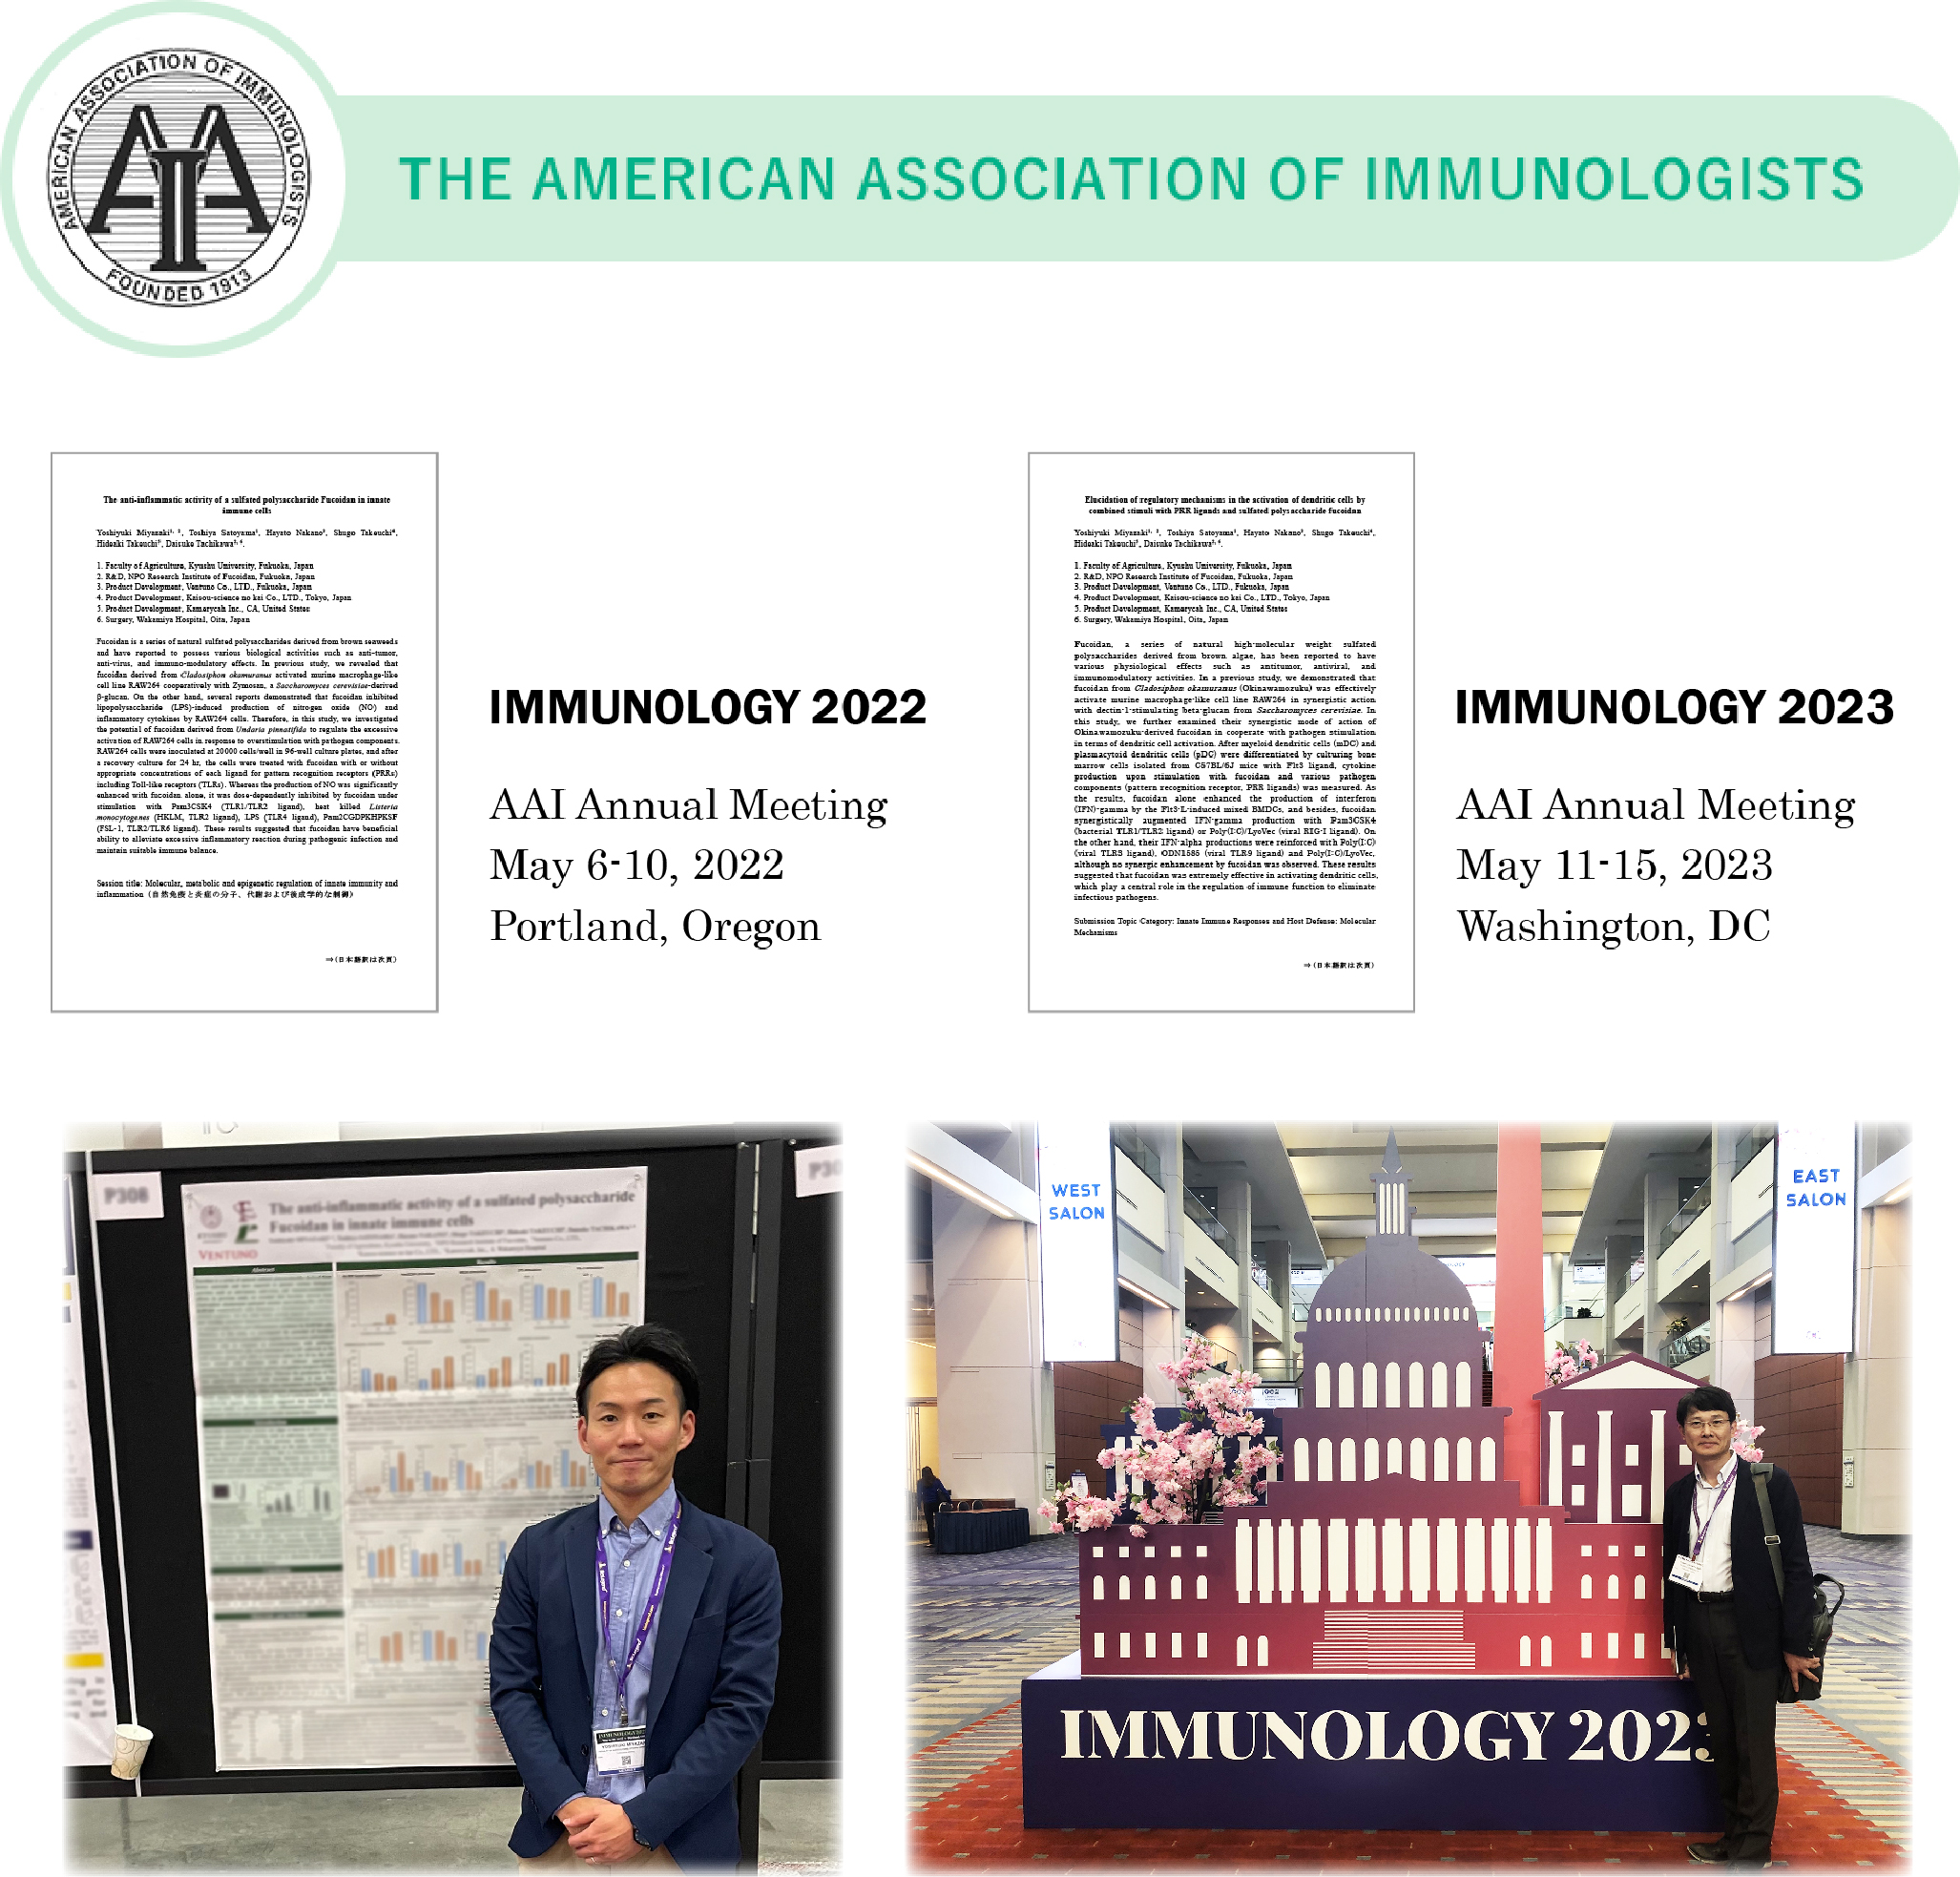 The American Association of Immunologist. IMMUNOLOGY 2016, May 13-17, 2016. AAI Anual Meeting, Seattle, Washington. IMMUNOLOGY 2018, May 4-8, 2018. AAI Anual Meeting, Austin, Texas.